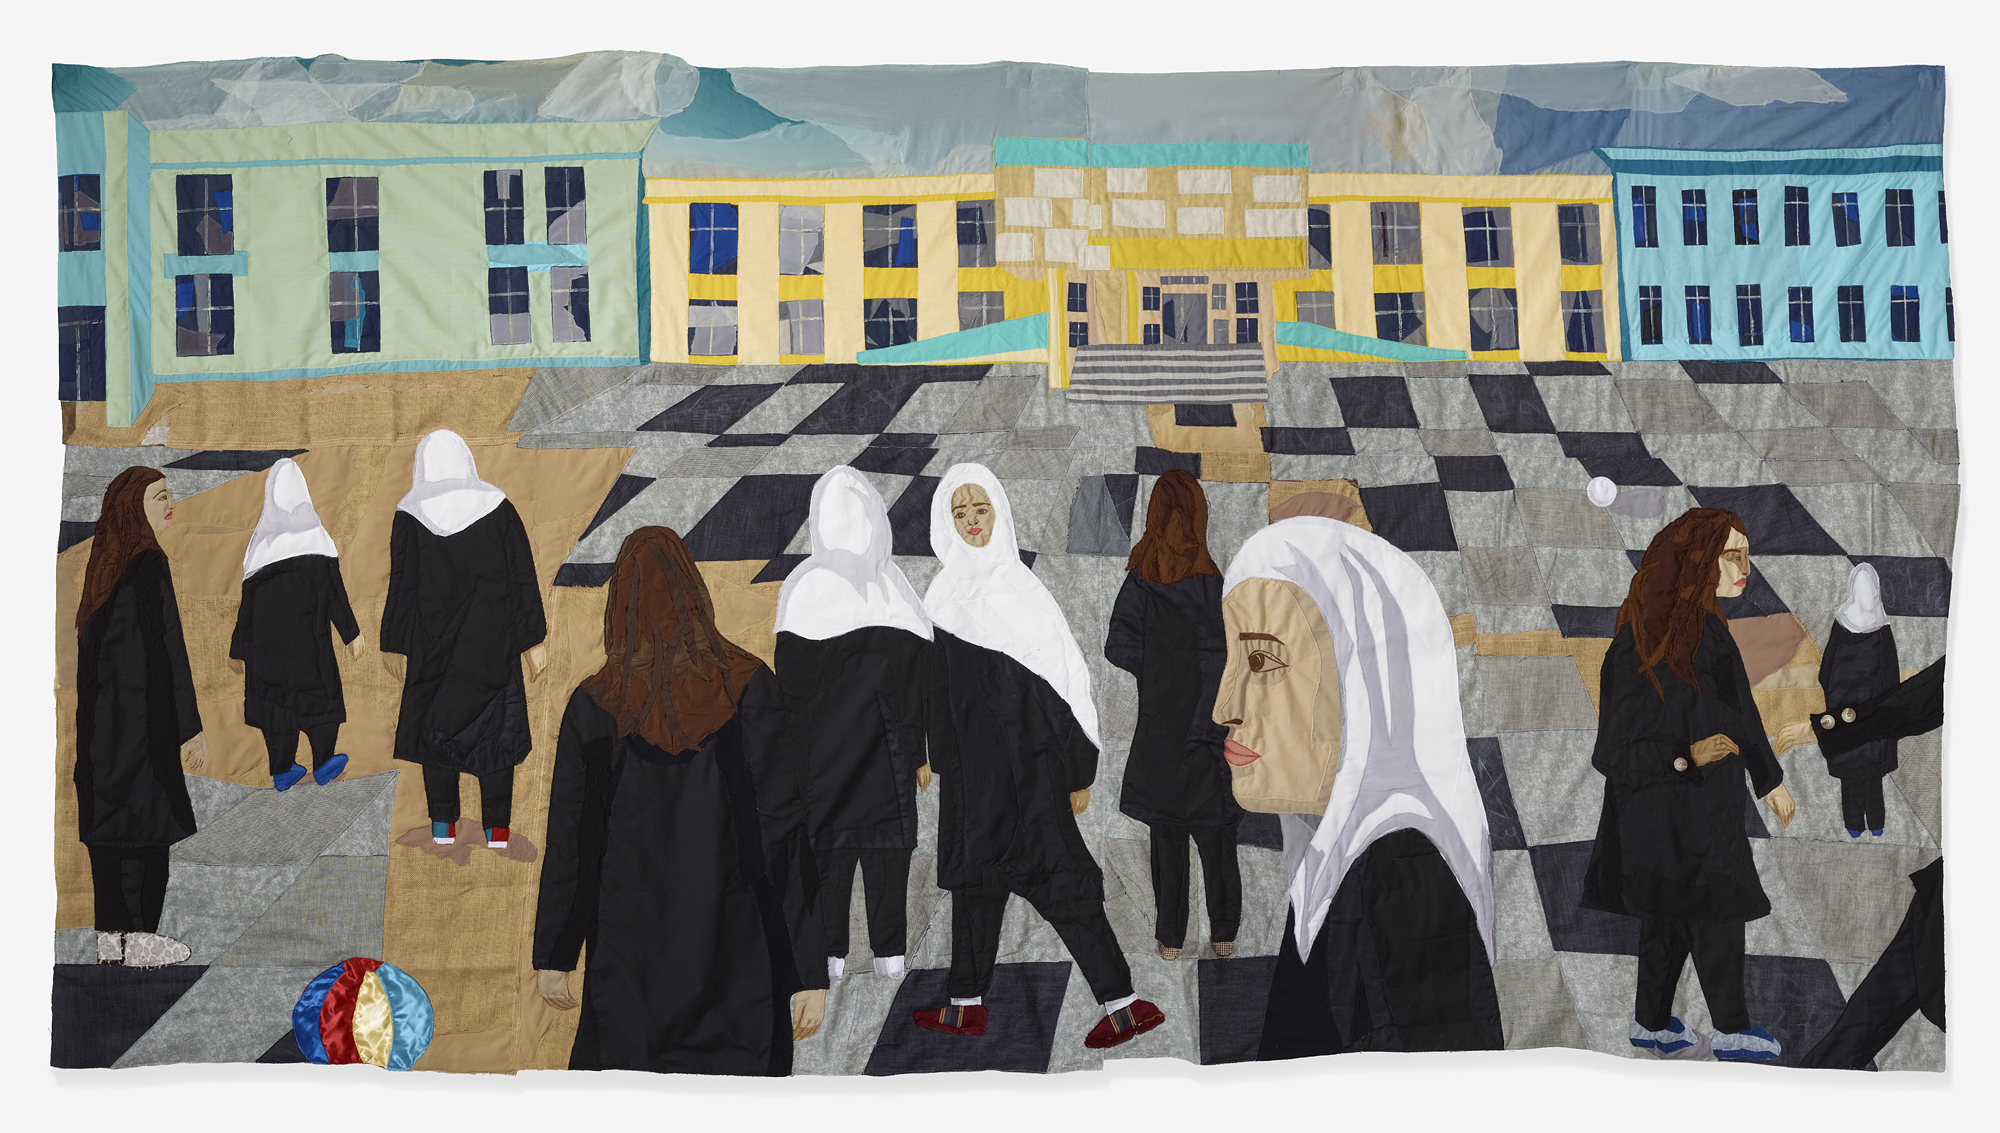 Recess 2022, muslin, cotton, chiffon, polyester, faux leather, denim, burlap, colored pencil on fabric, acrylic paint, velvet, and found fabric – 70.5